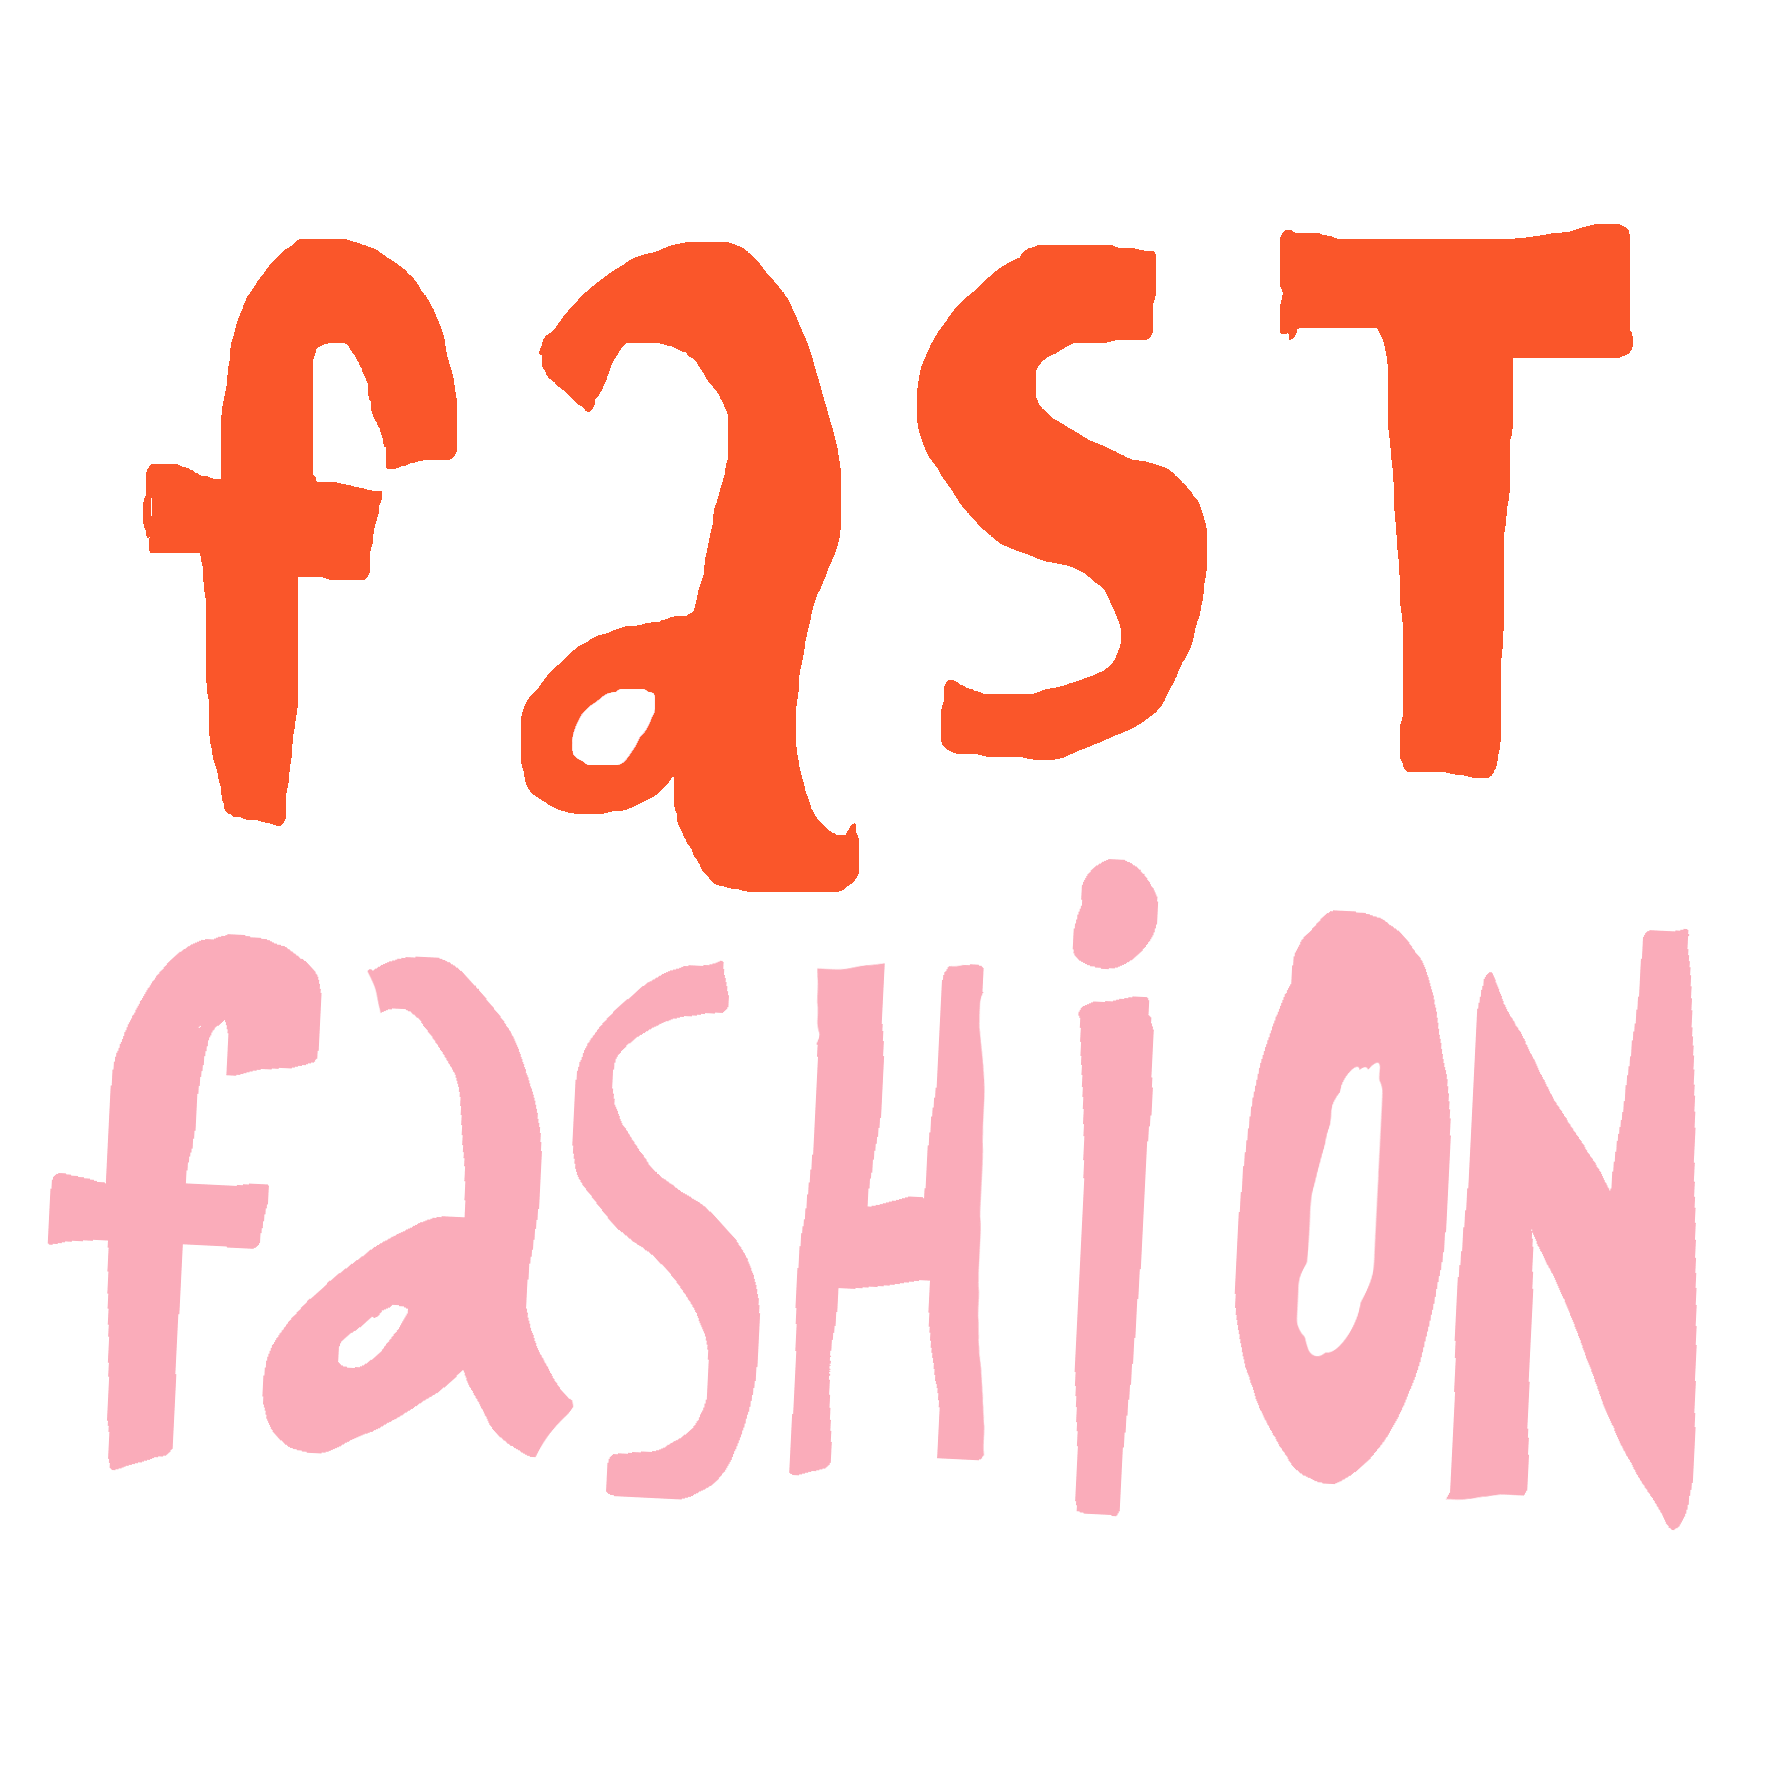 Slow Fashion Sticker by Ezra W. Smith for iOS & Android | GIPHY